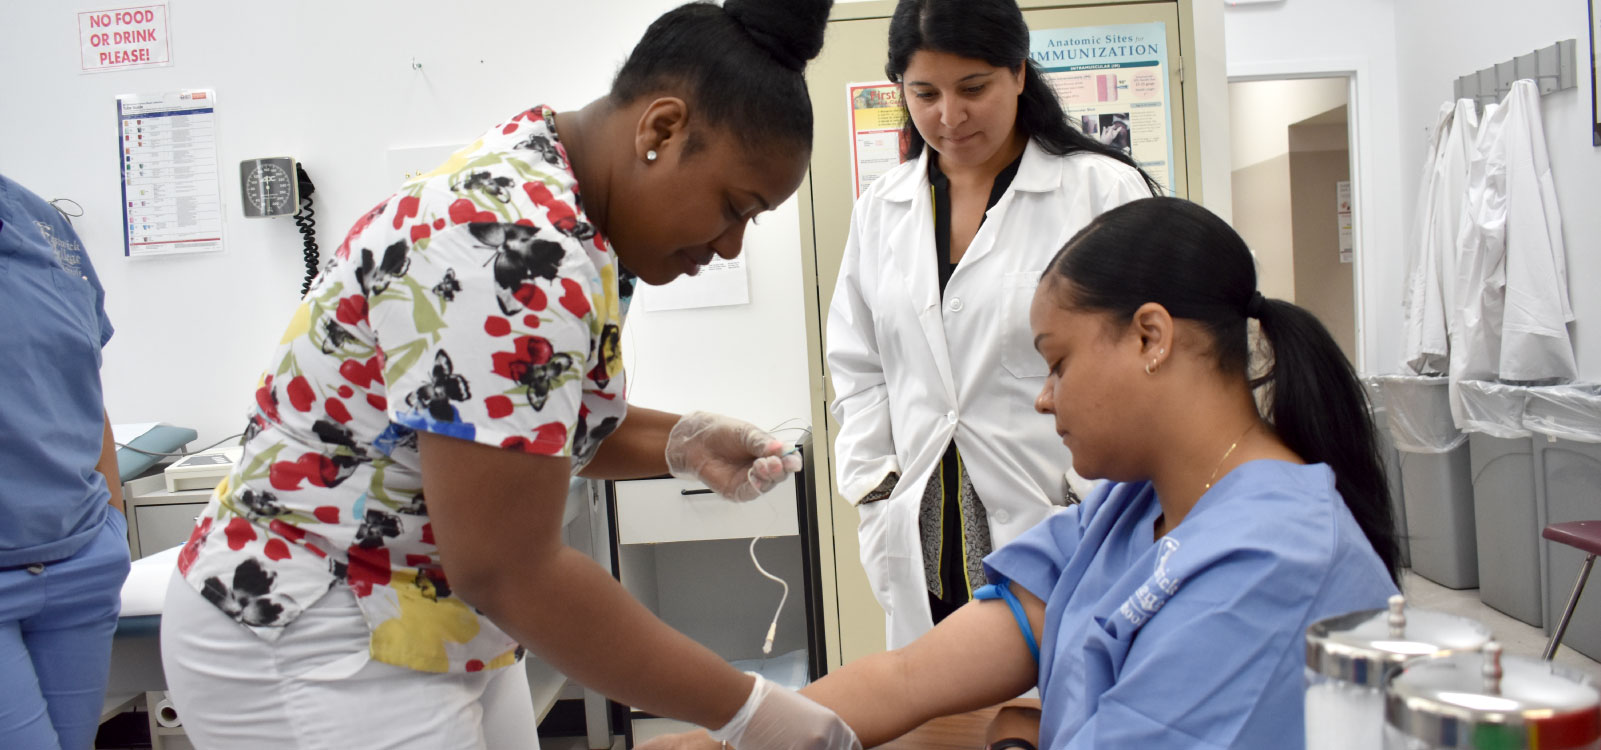 medical assisting student practices drawing blood on fellow student while instructor watches